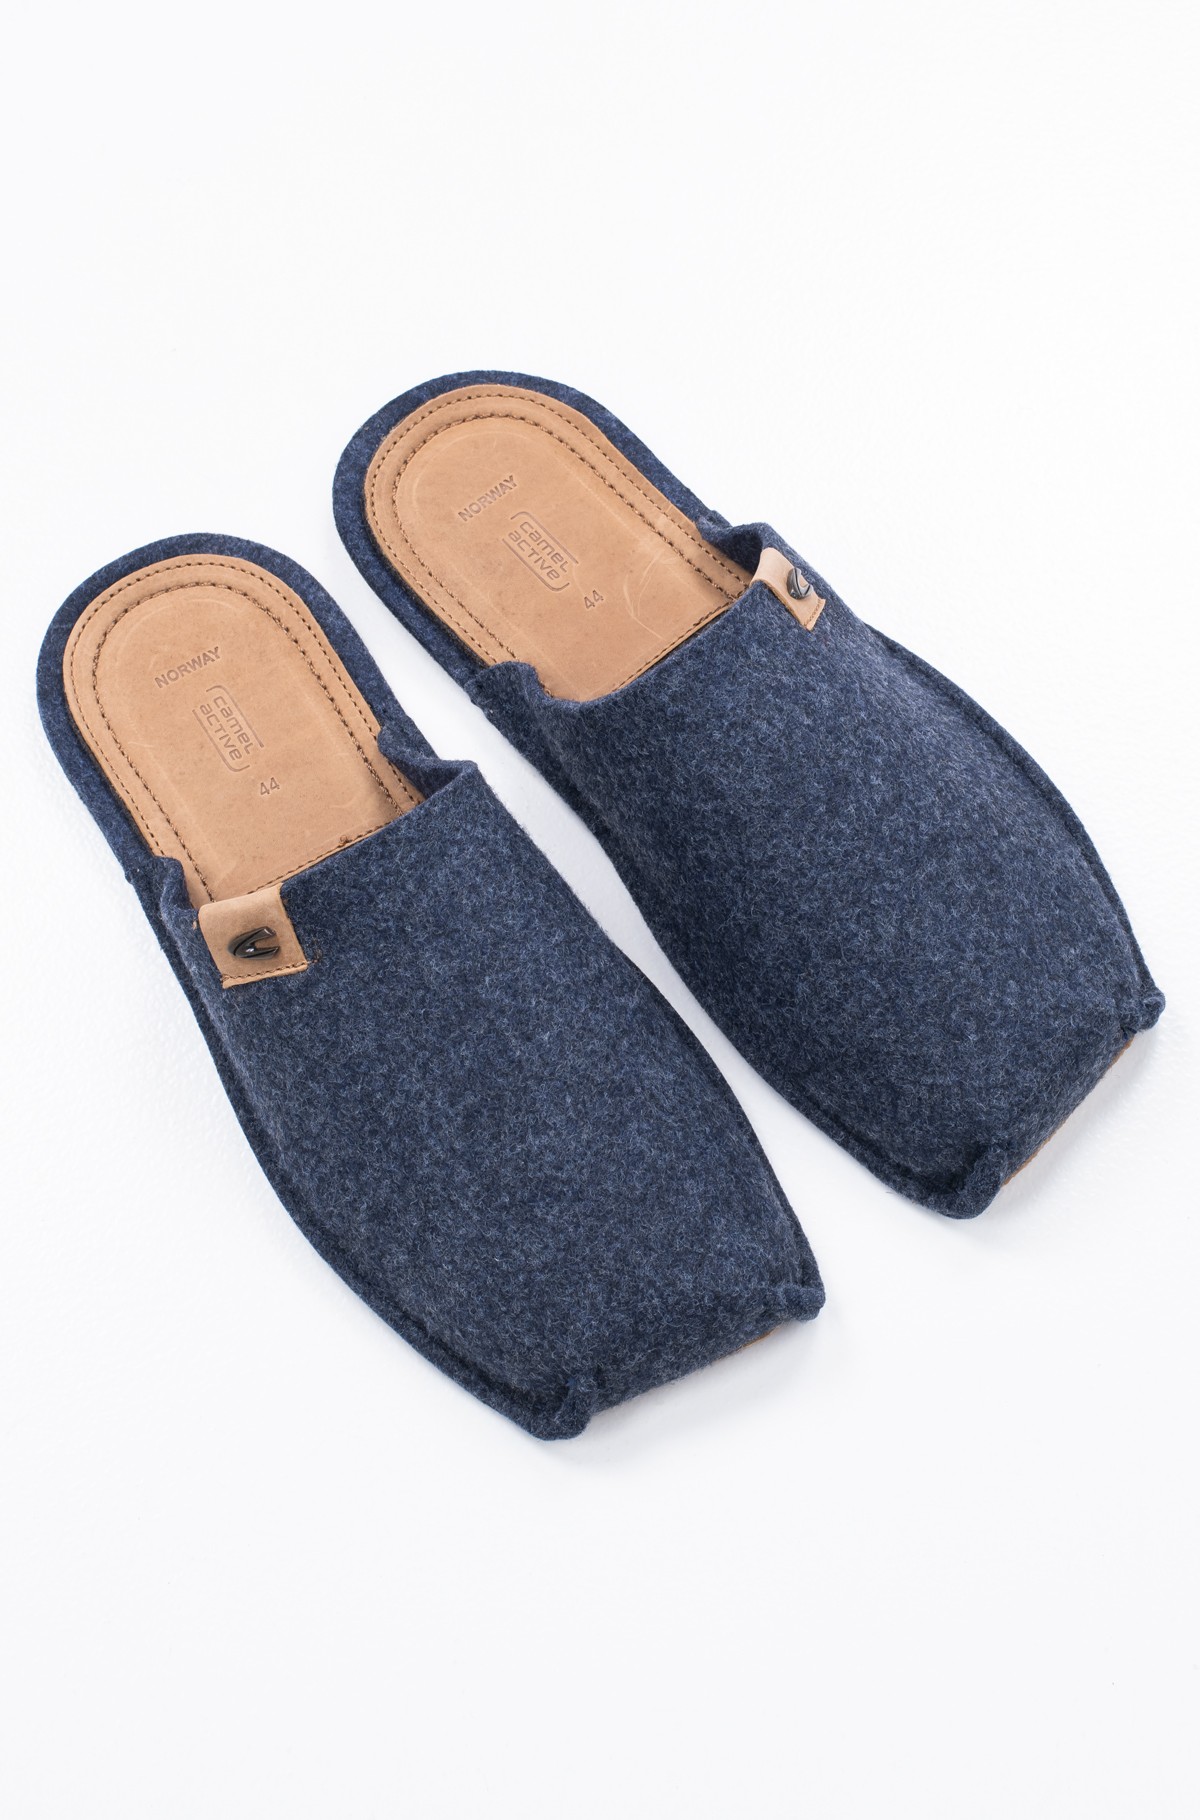 womens clogs and mules uk